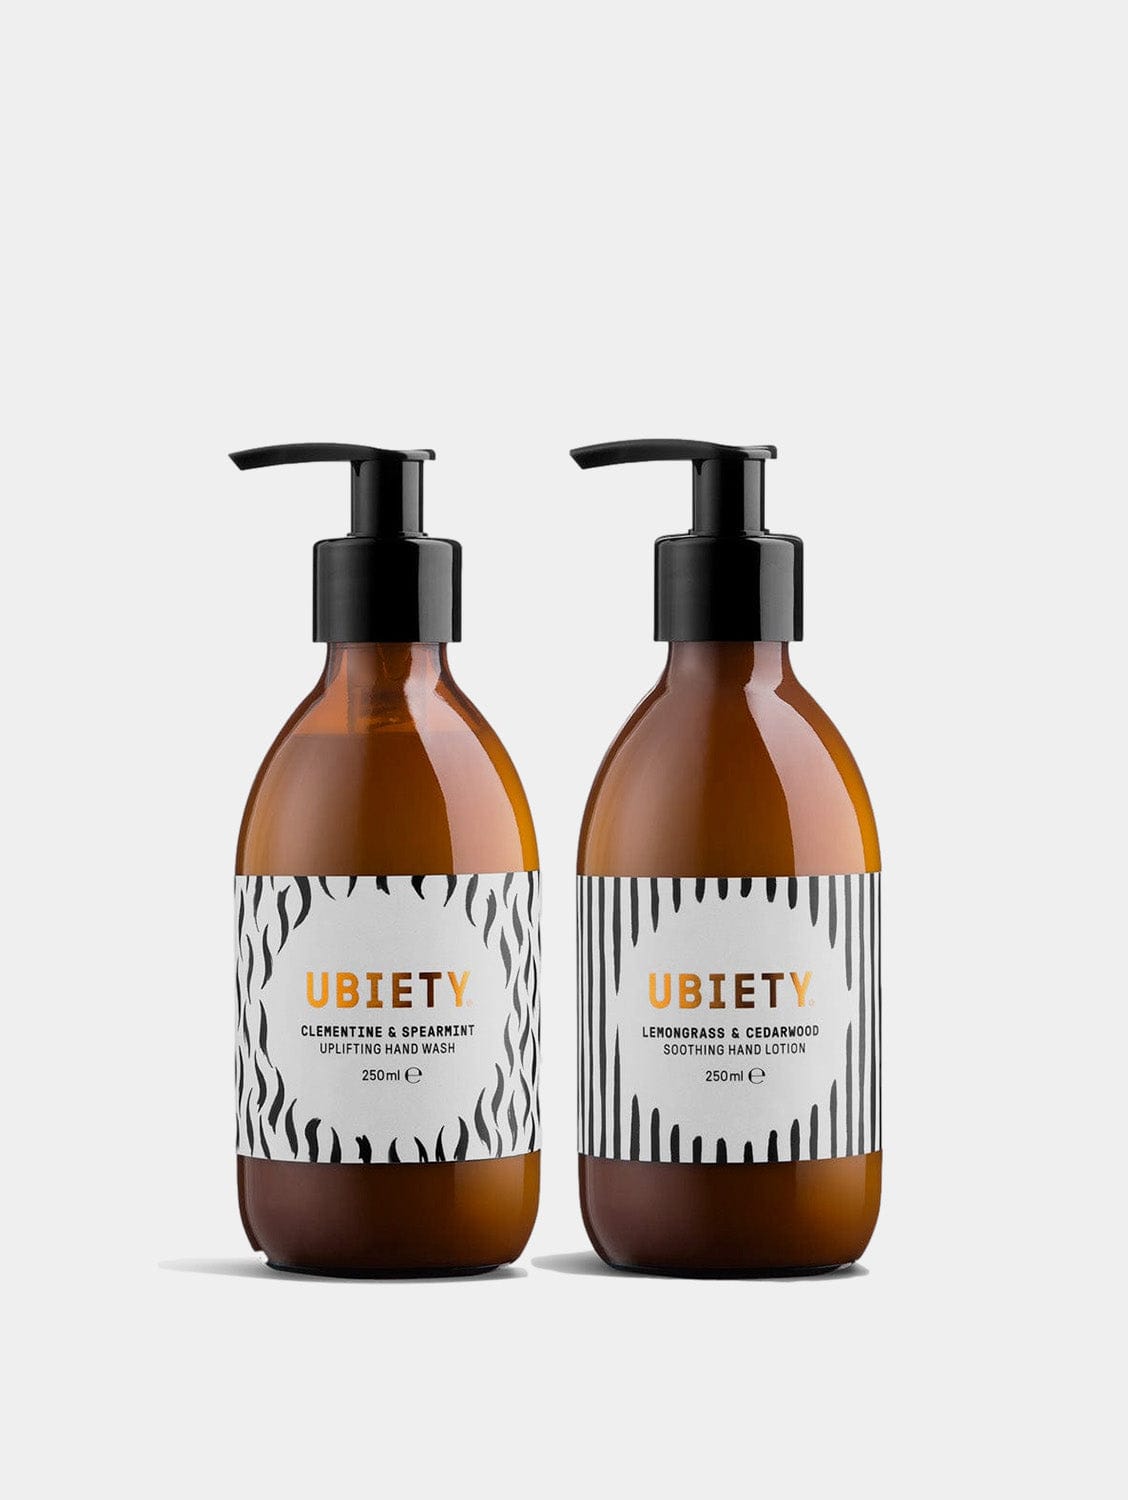 Ubiety Cleanse, Soothe, Repeat Duo | Hand Wash & Hand Lotion